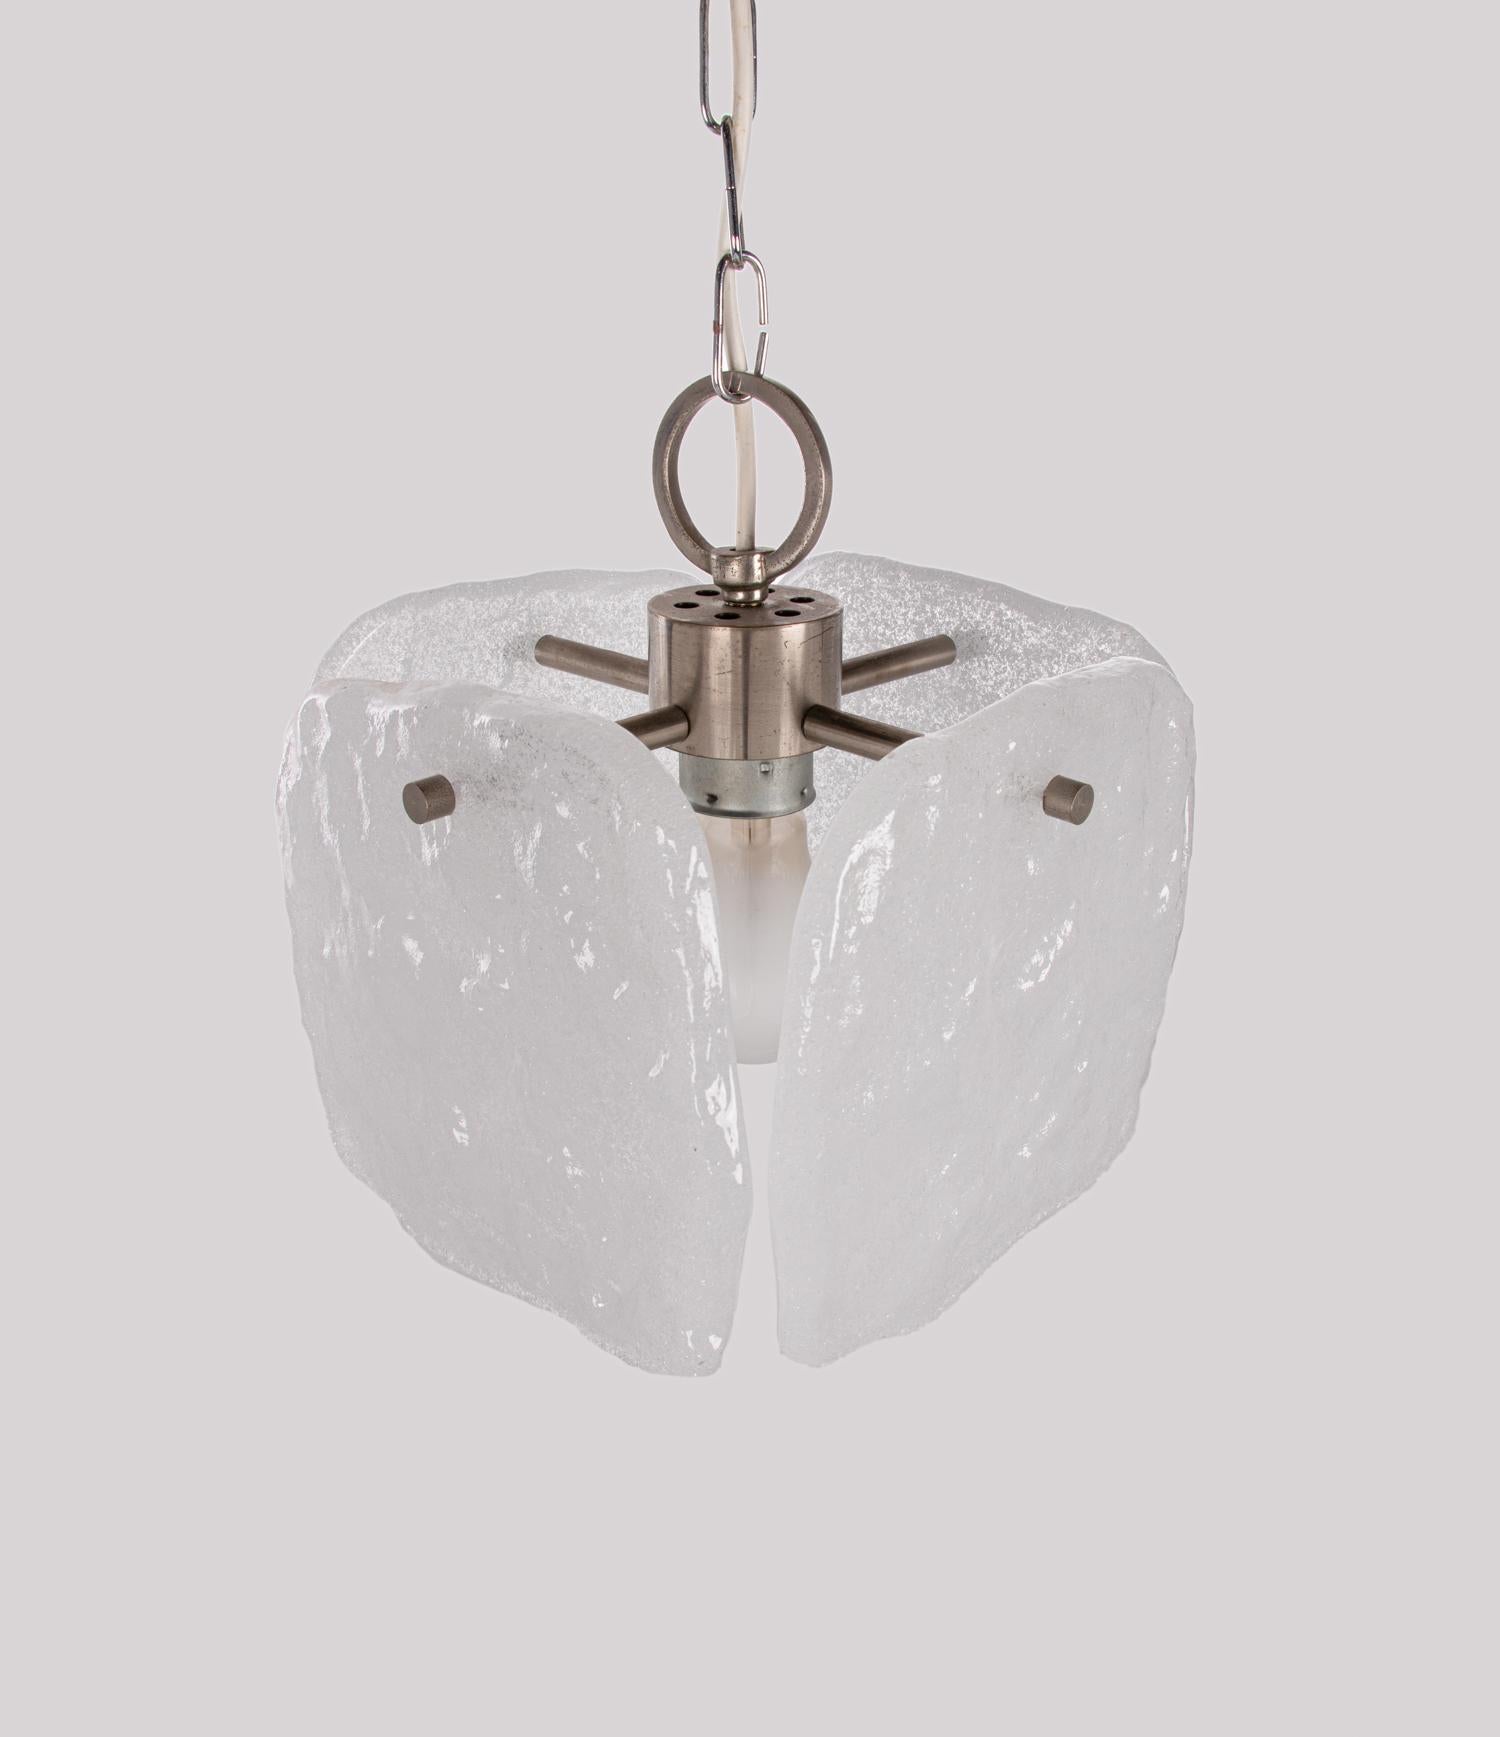 Hand-Crafted J.T. Kalmar Frosted Glass Panel Pendant Lamp Austria, 1960s For Sale